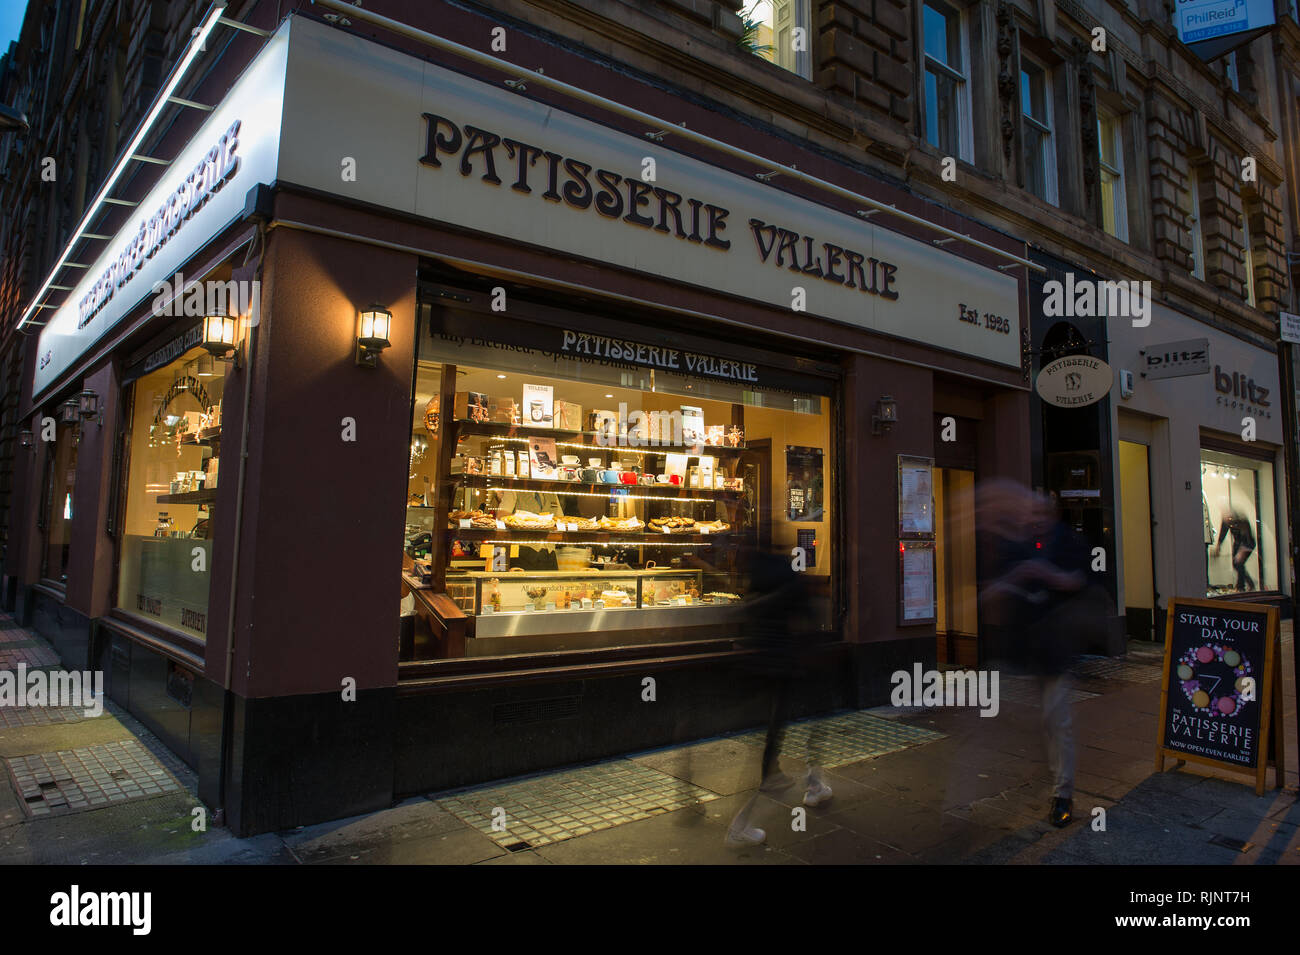 Glasgow, UK. 25 January 2019. Patisserie Valerie is a chain of cafés that operates in the United Kingdom. The chain specialises in hand-made cakes, an Stock Photo